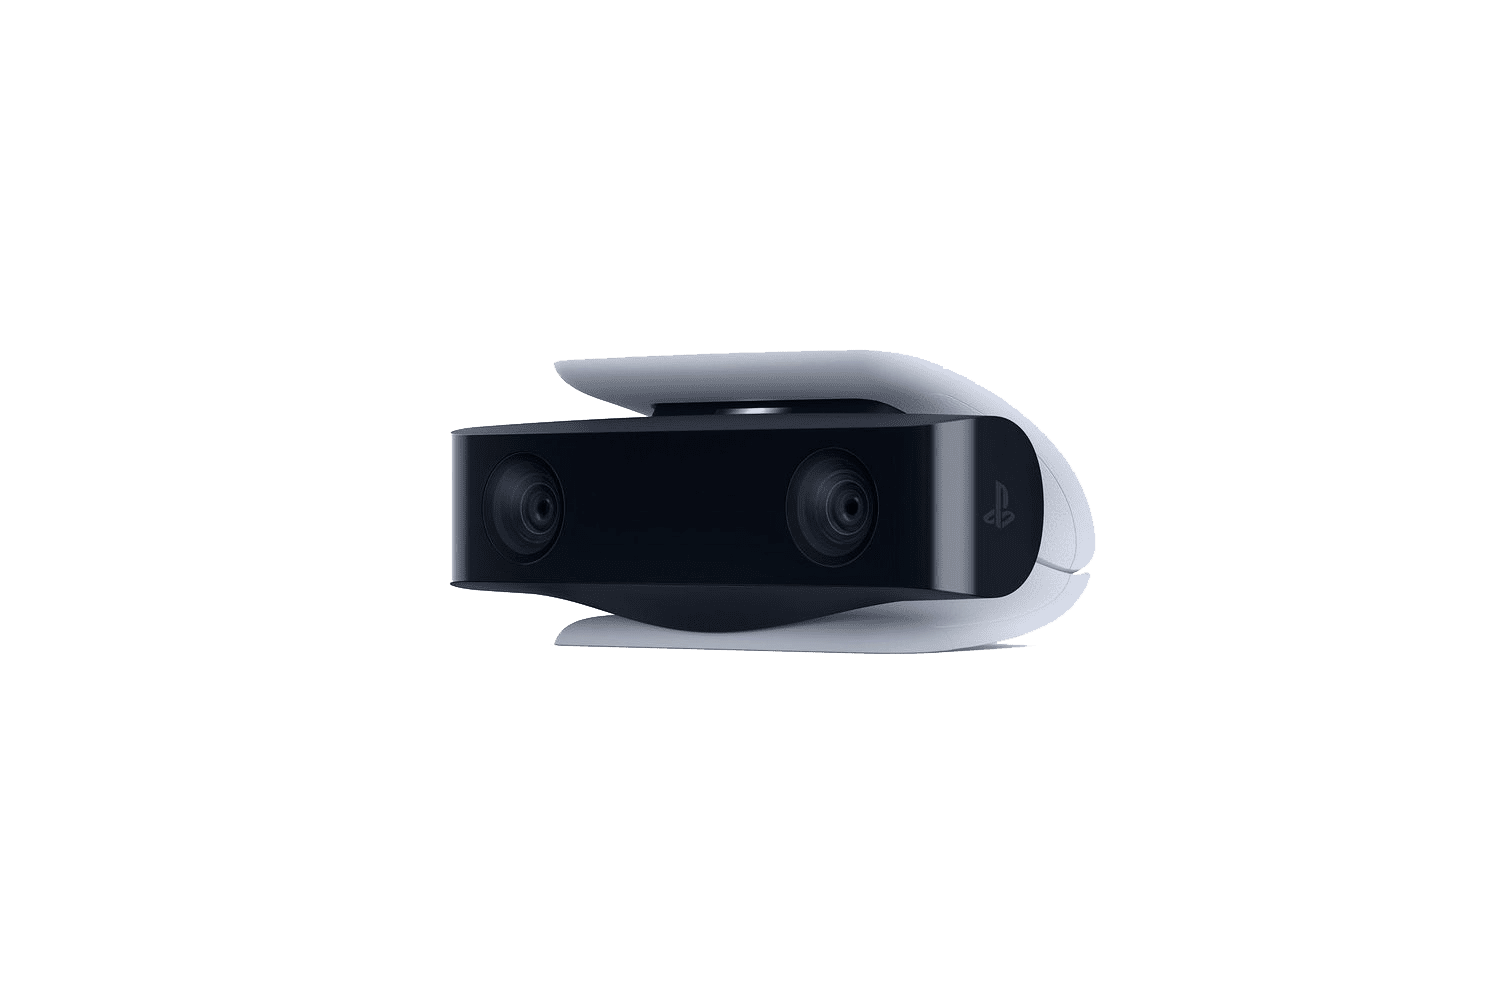 https://electrox.shop/wp-content/uploads/2022/03/playstation-5camera2.png